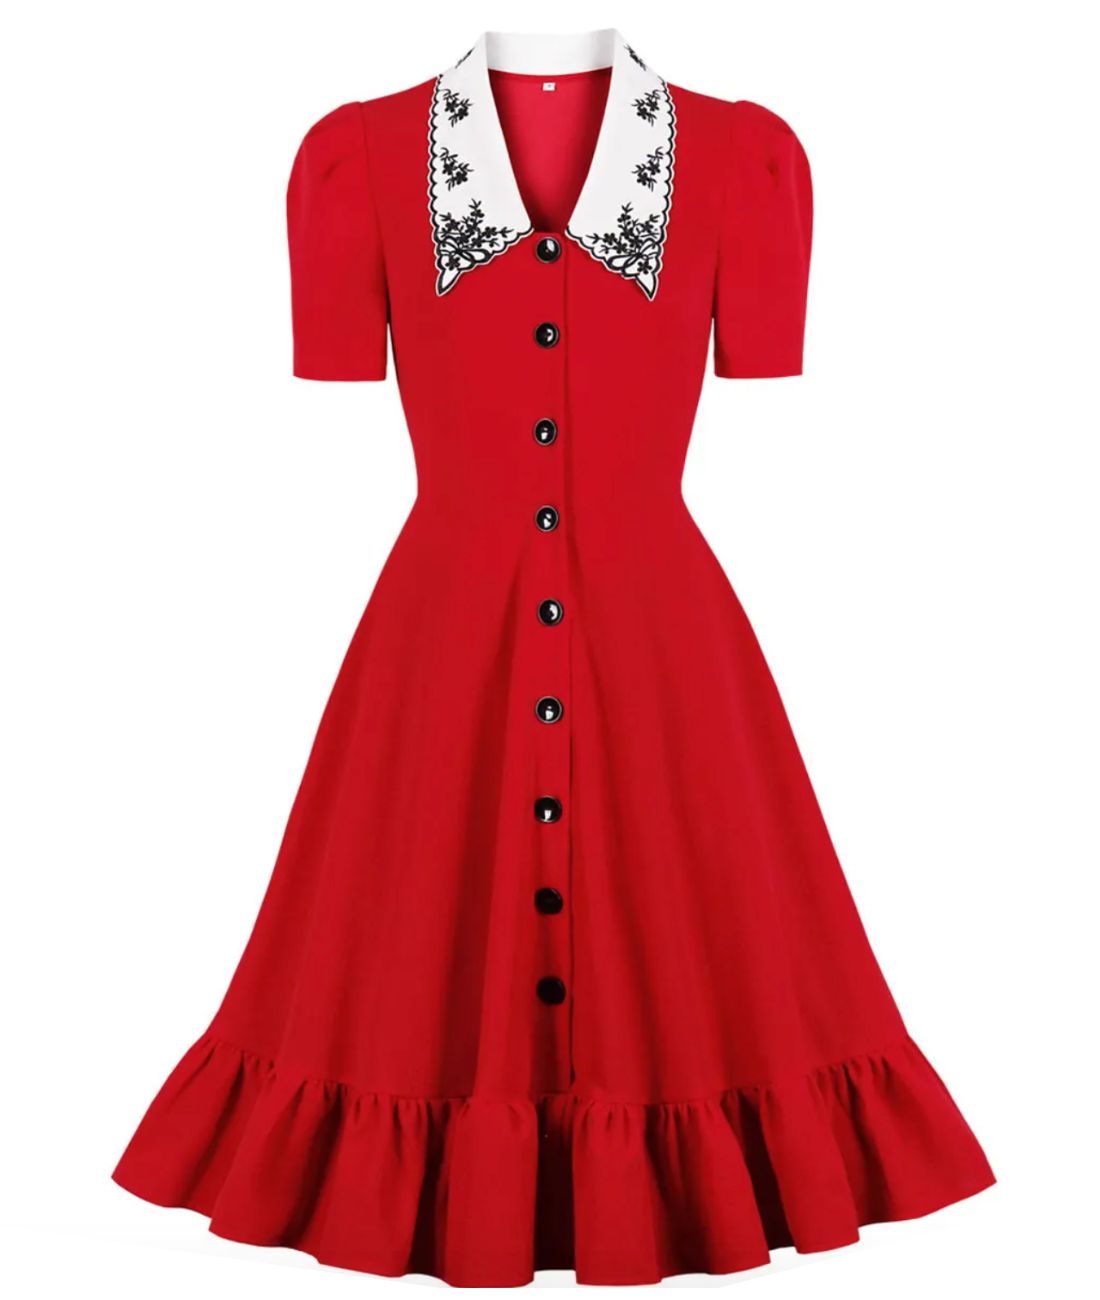 Robe Rock and Roll Année 60 - Madame Vintage